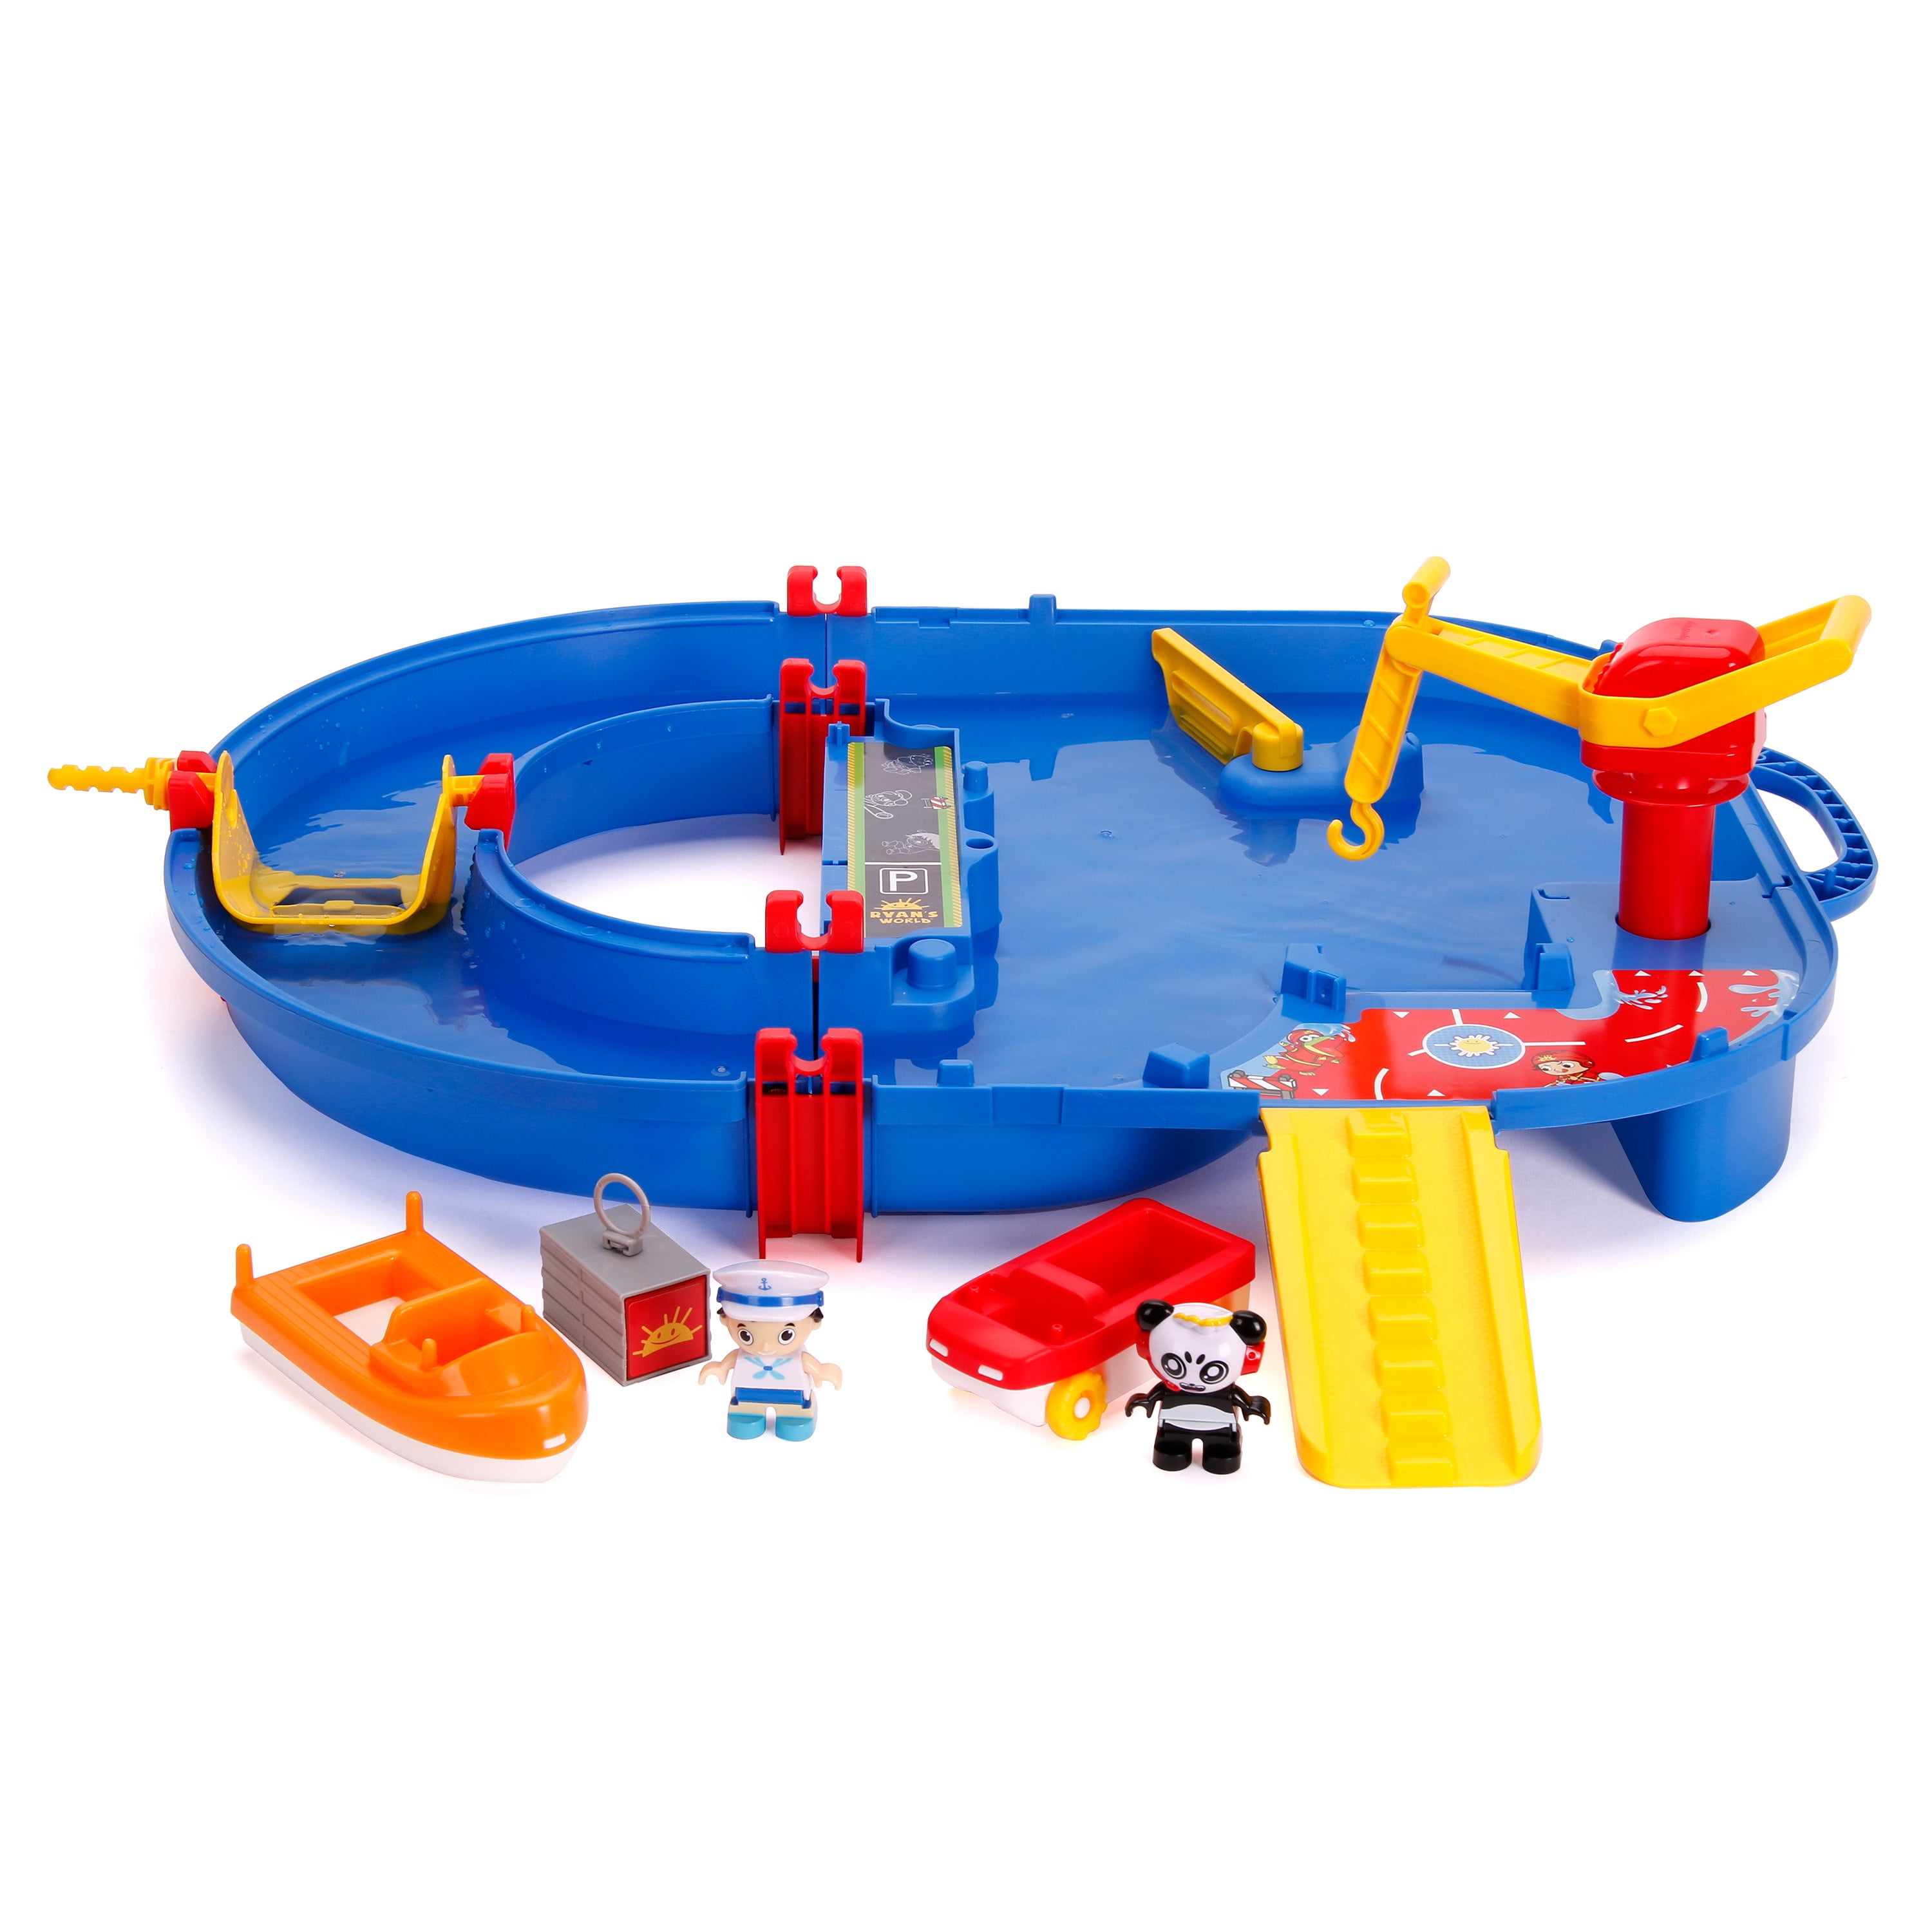 Buy Aquaplay Lock Box Playset Online at Low Prices in India 